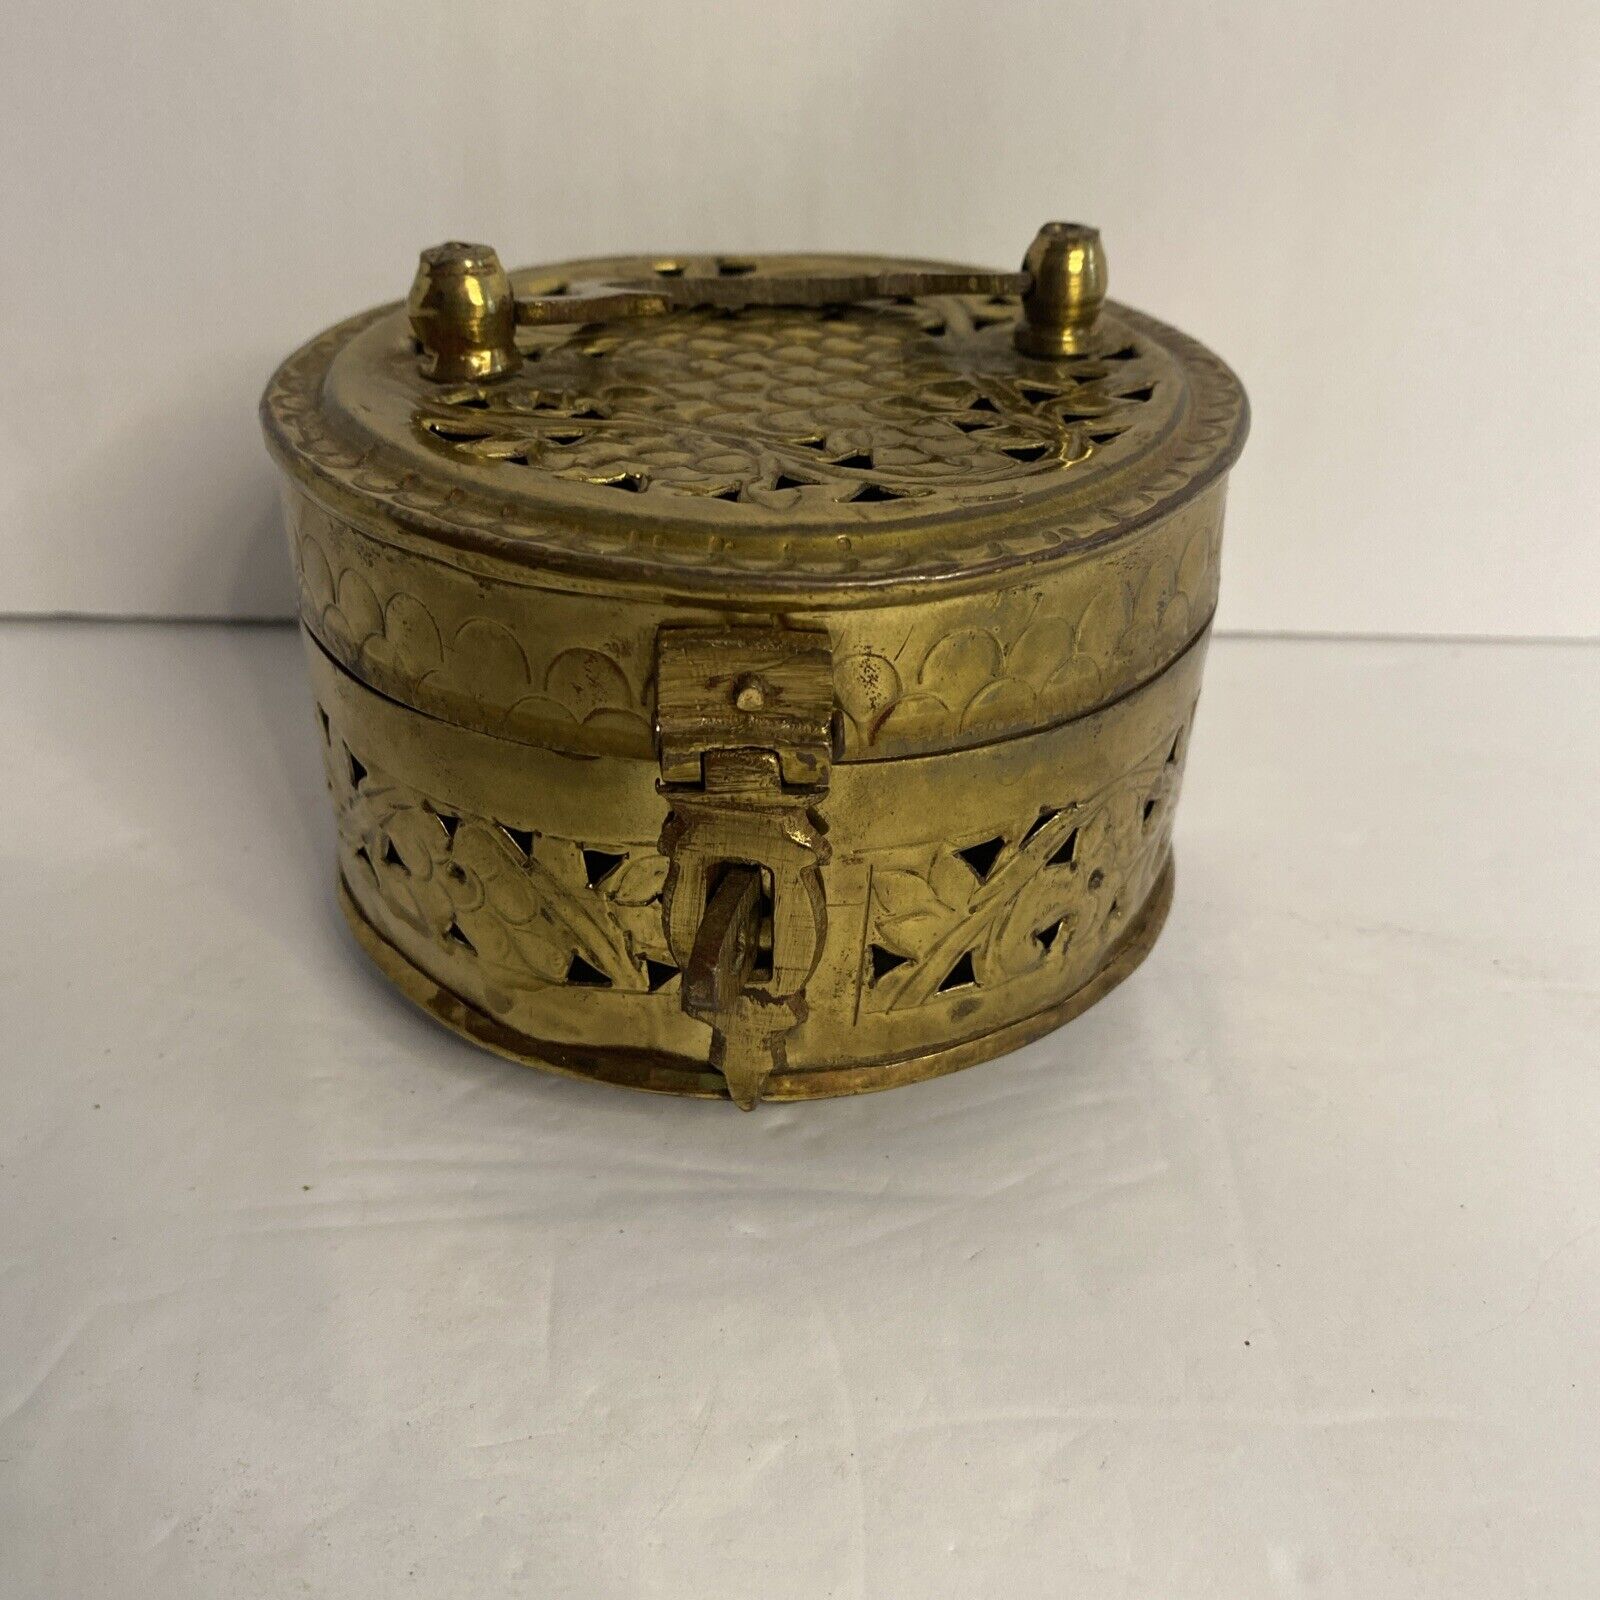 Vintage Oval Pierced Brass Potpourri Cricket Box With Lockable Hinged Lid